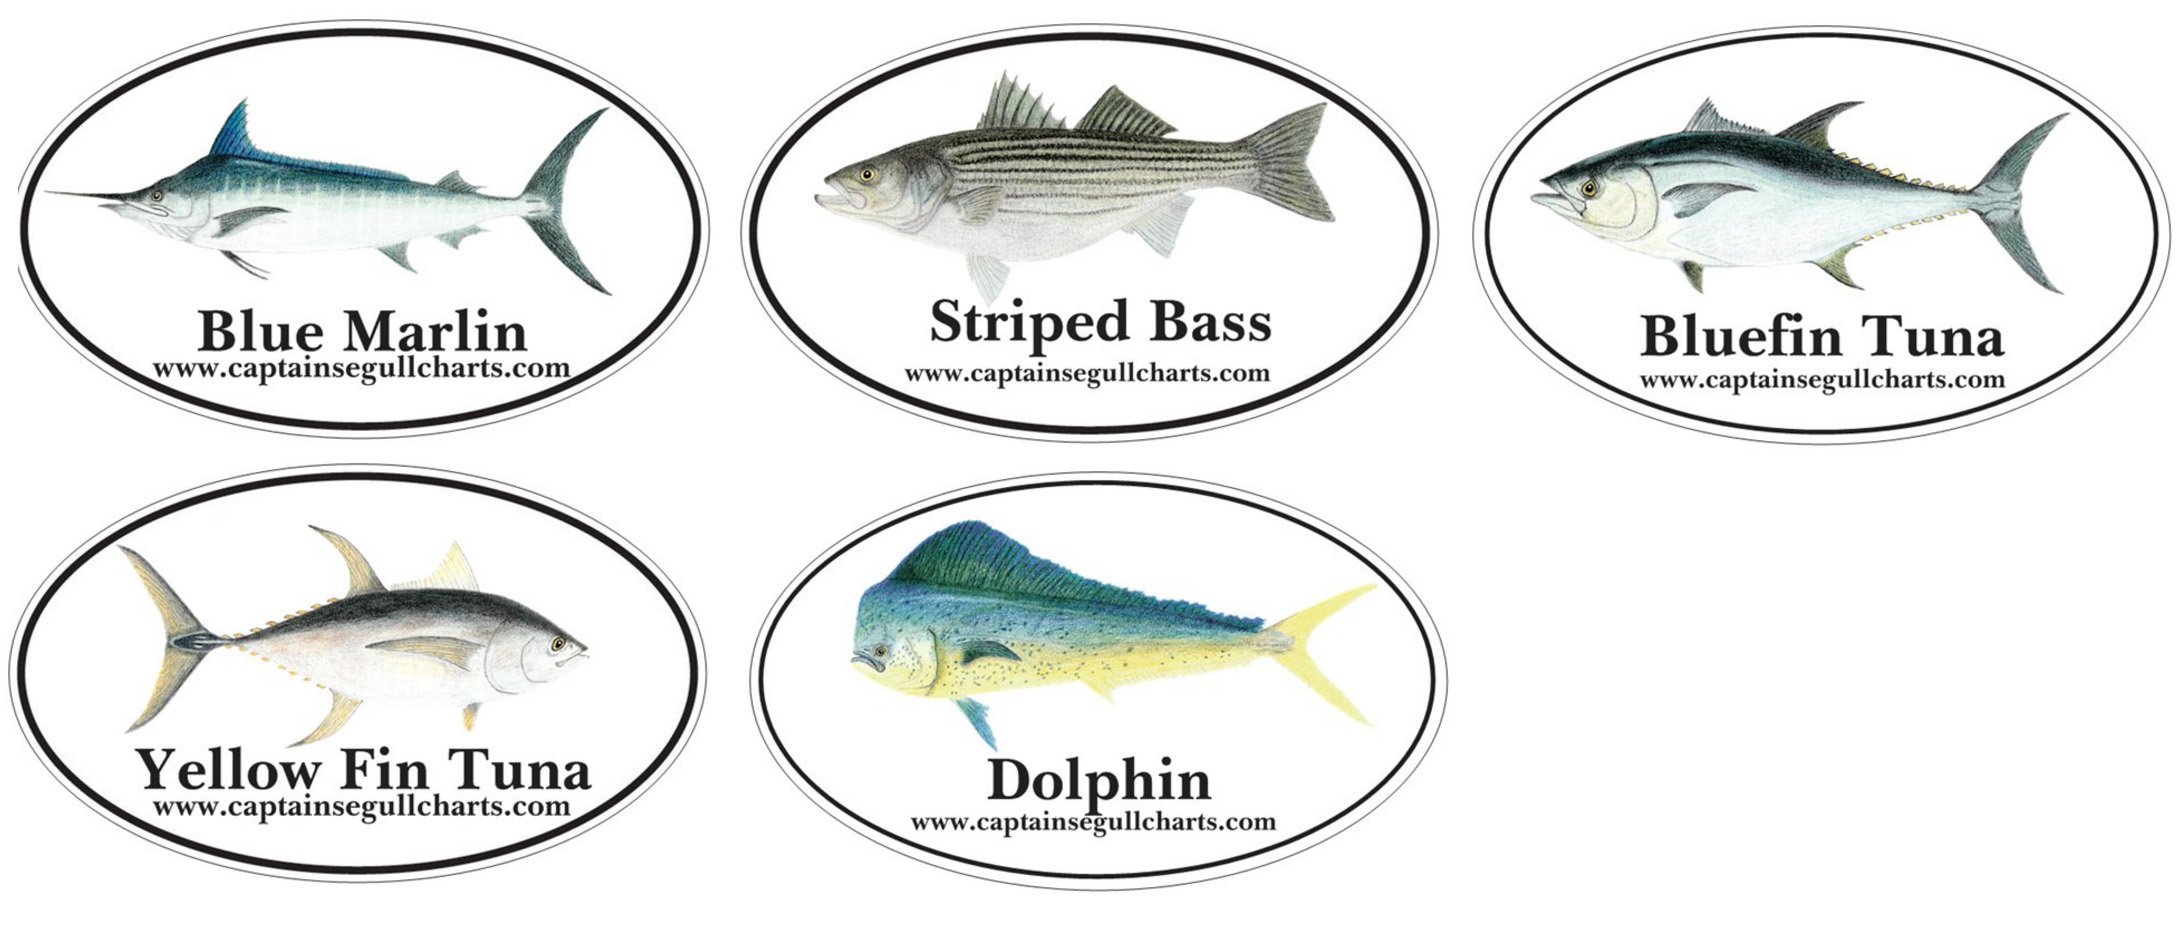 Fish Bumper Stickers: High quality outdoor grade vinyl stickers, 3in x 5in depicting Capt. Segull's rendering of certain fish that are on our Fish Identification Charts